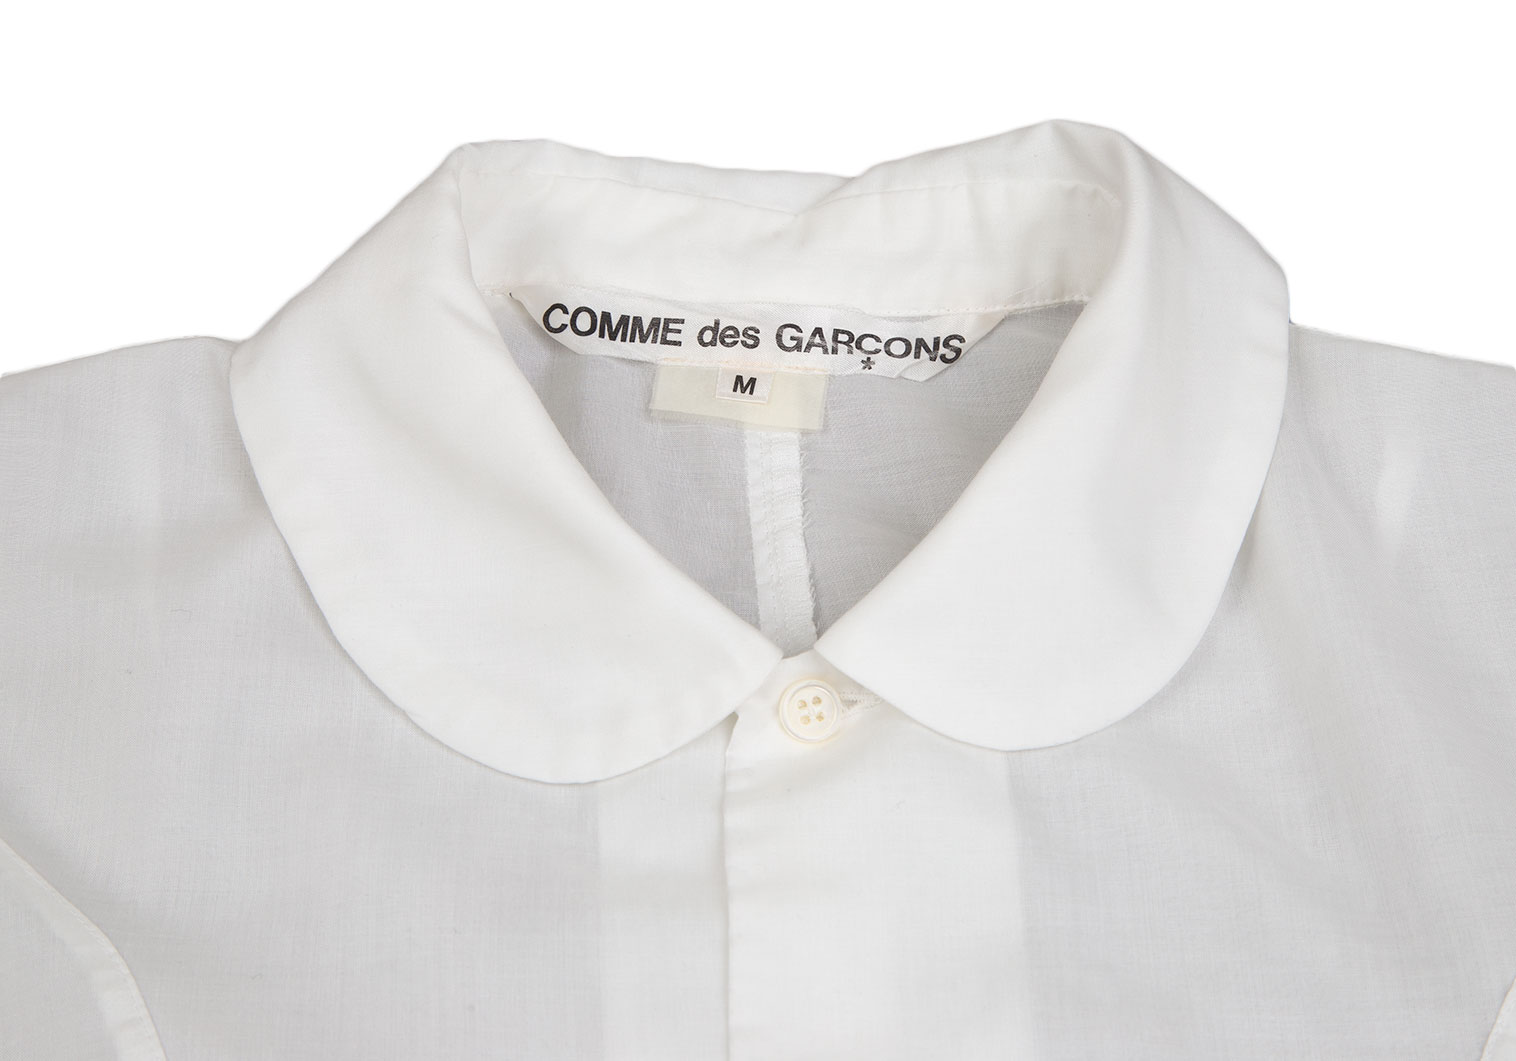 COMME des GARCONS リボン カットソー ブラウス